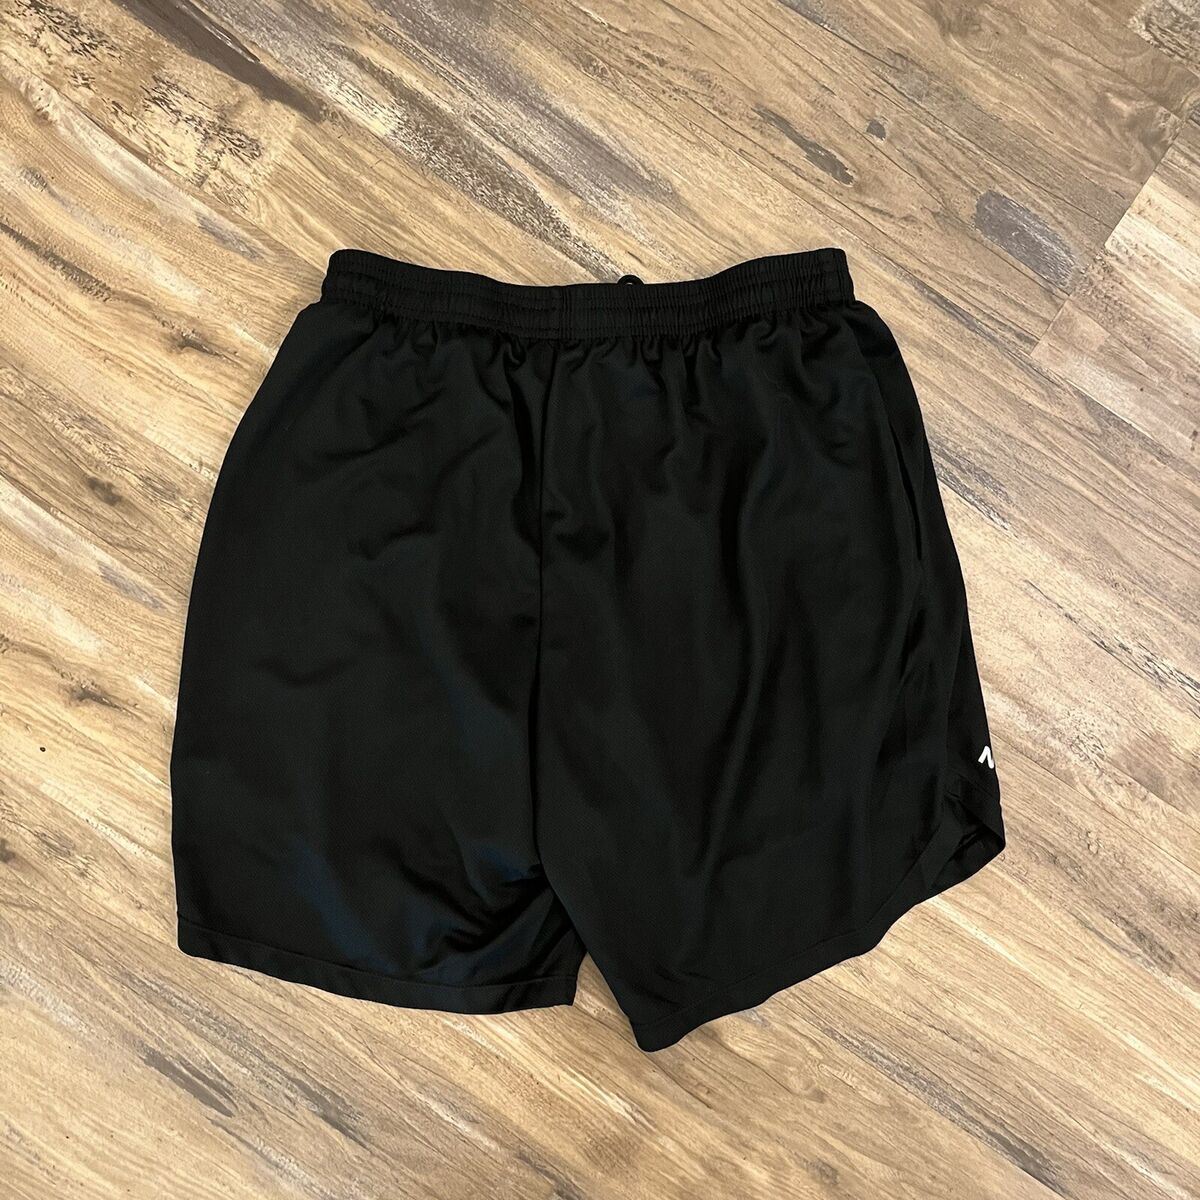 Men's Neleus 2 in 1 Dry Fit Lined Running Workout Shorts sz M Black White